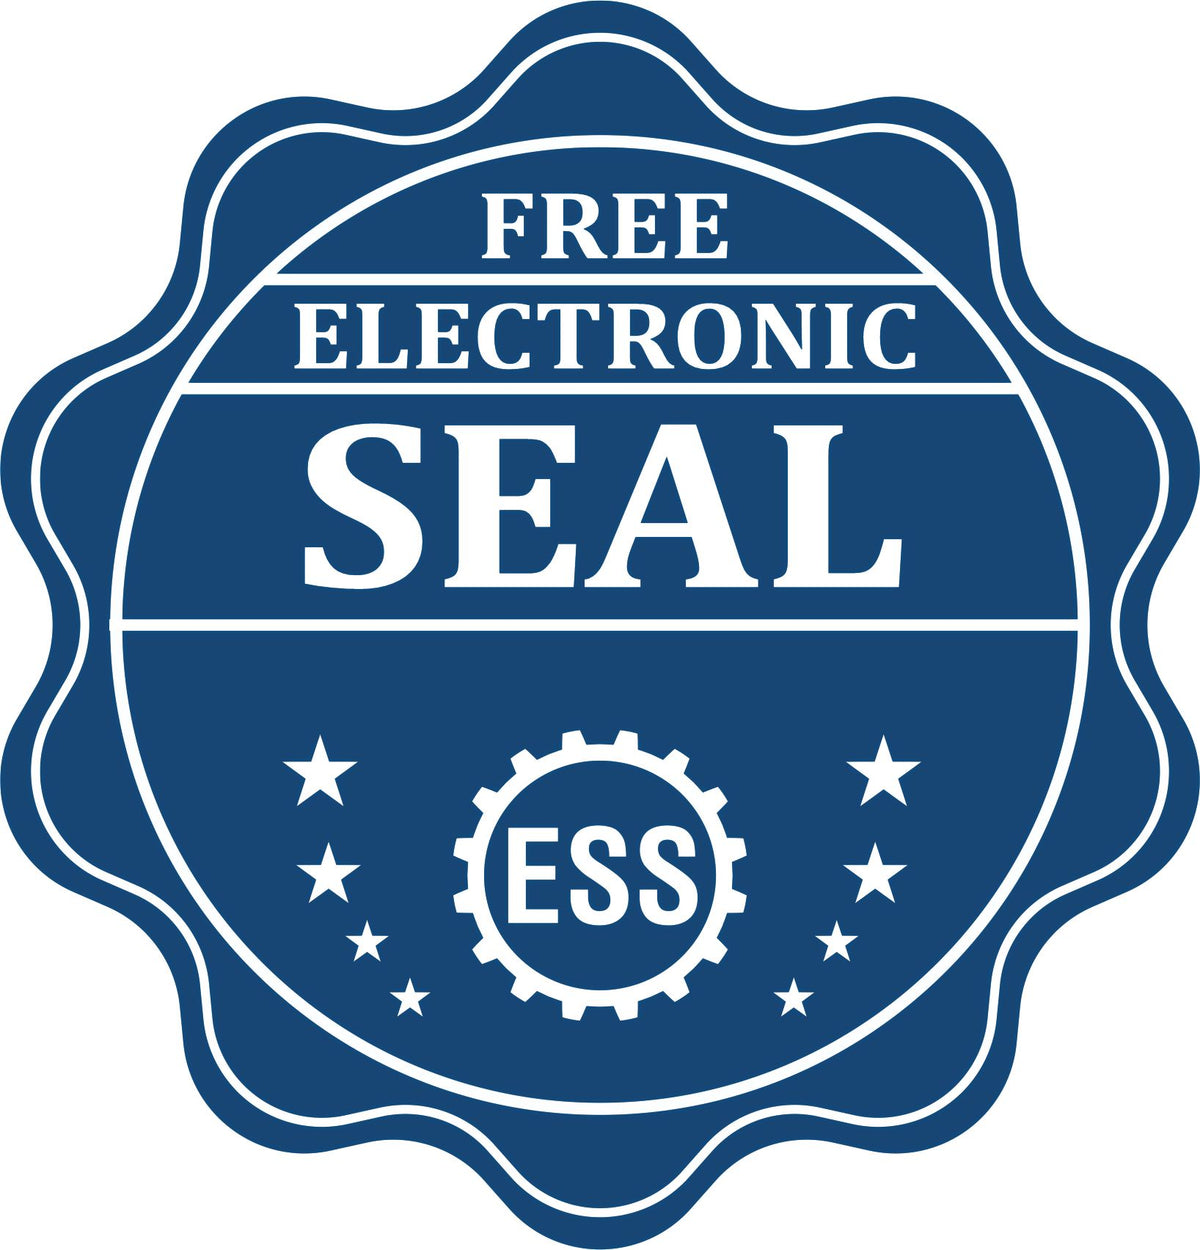 A badge showing a free electronic seal for the Soft Rhode Island Professional Engineer Seal with stars and the ESS gear on the emblem.